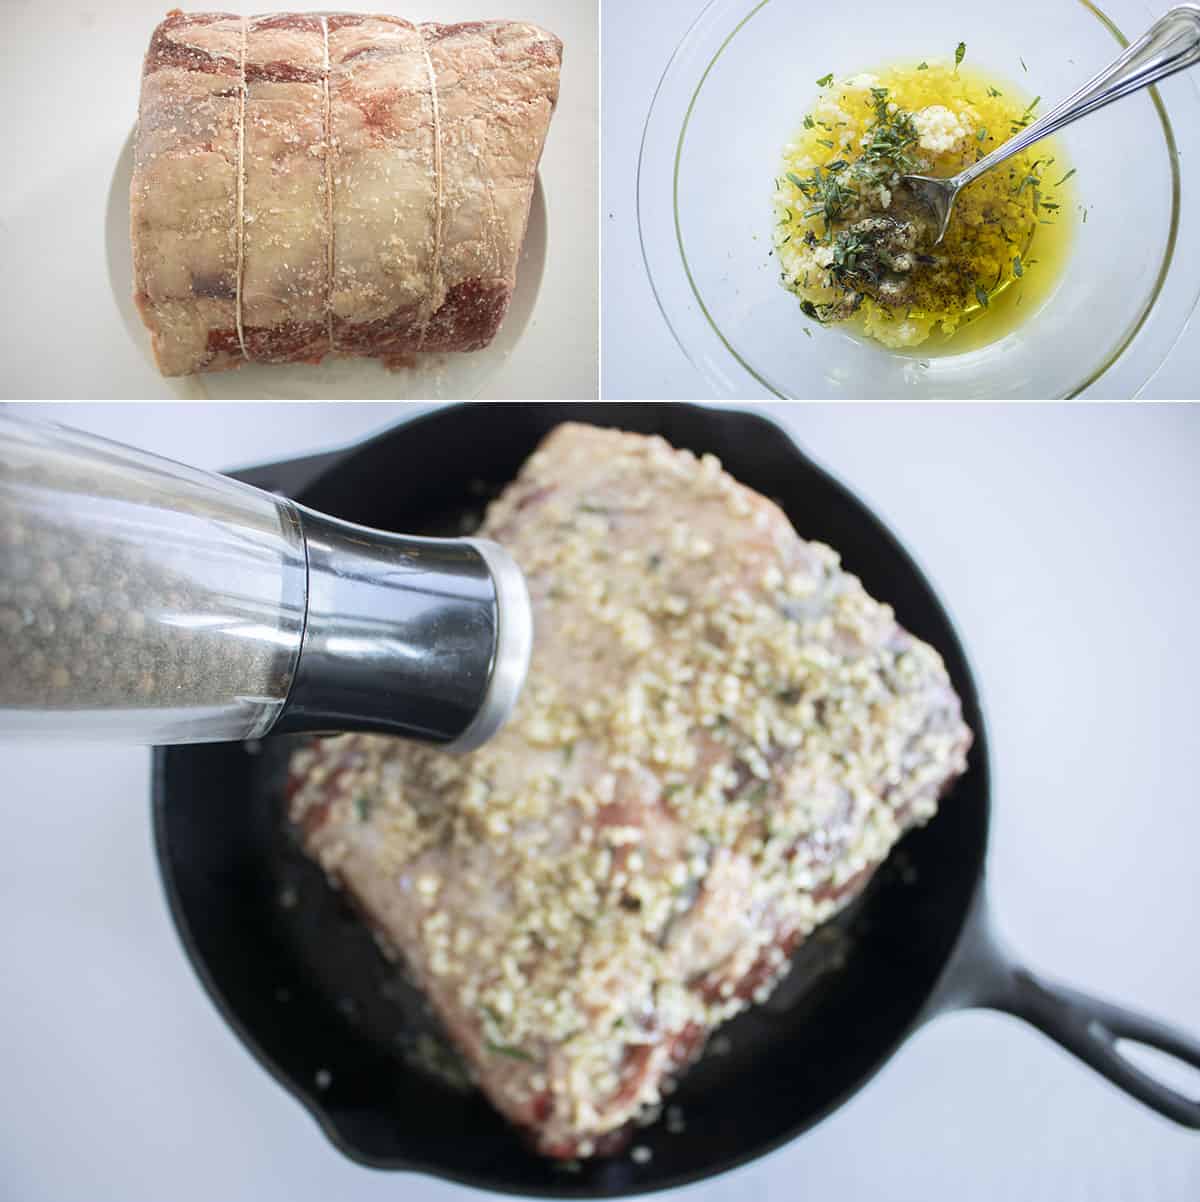 Showing process How to make Prime Rib with Herb Crust